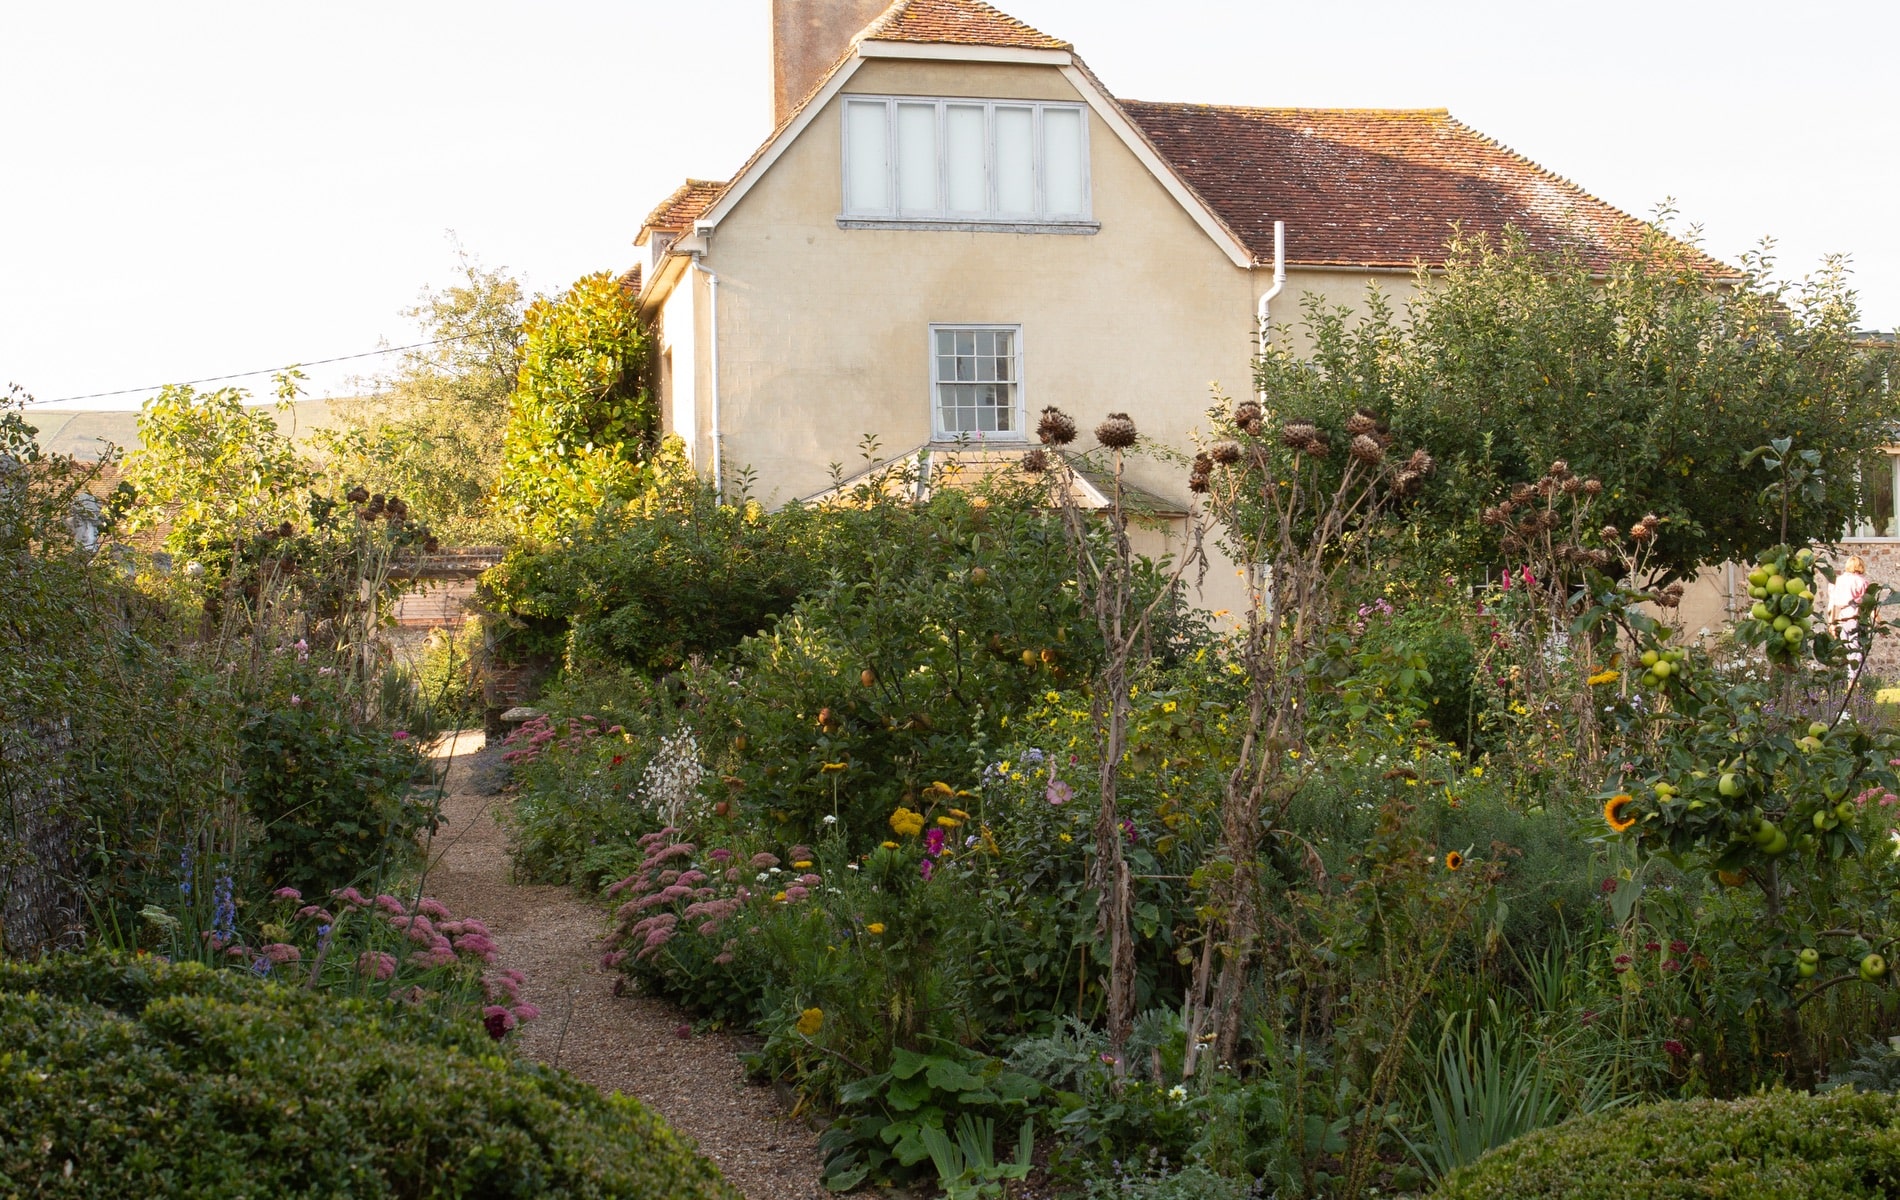 The Famed Charleston Farmhouse in East Sussex